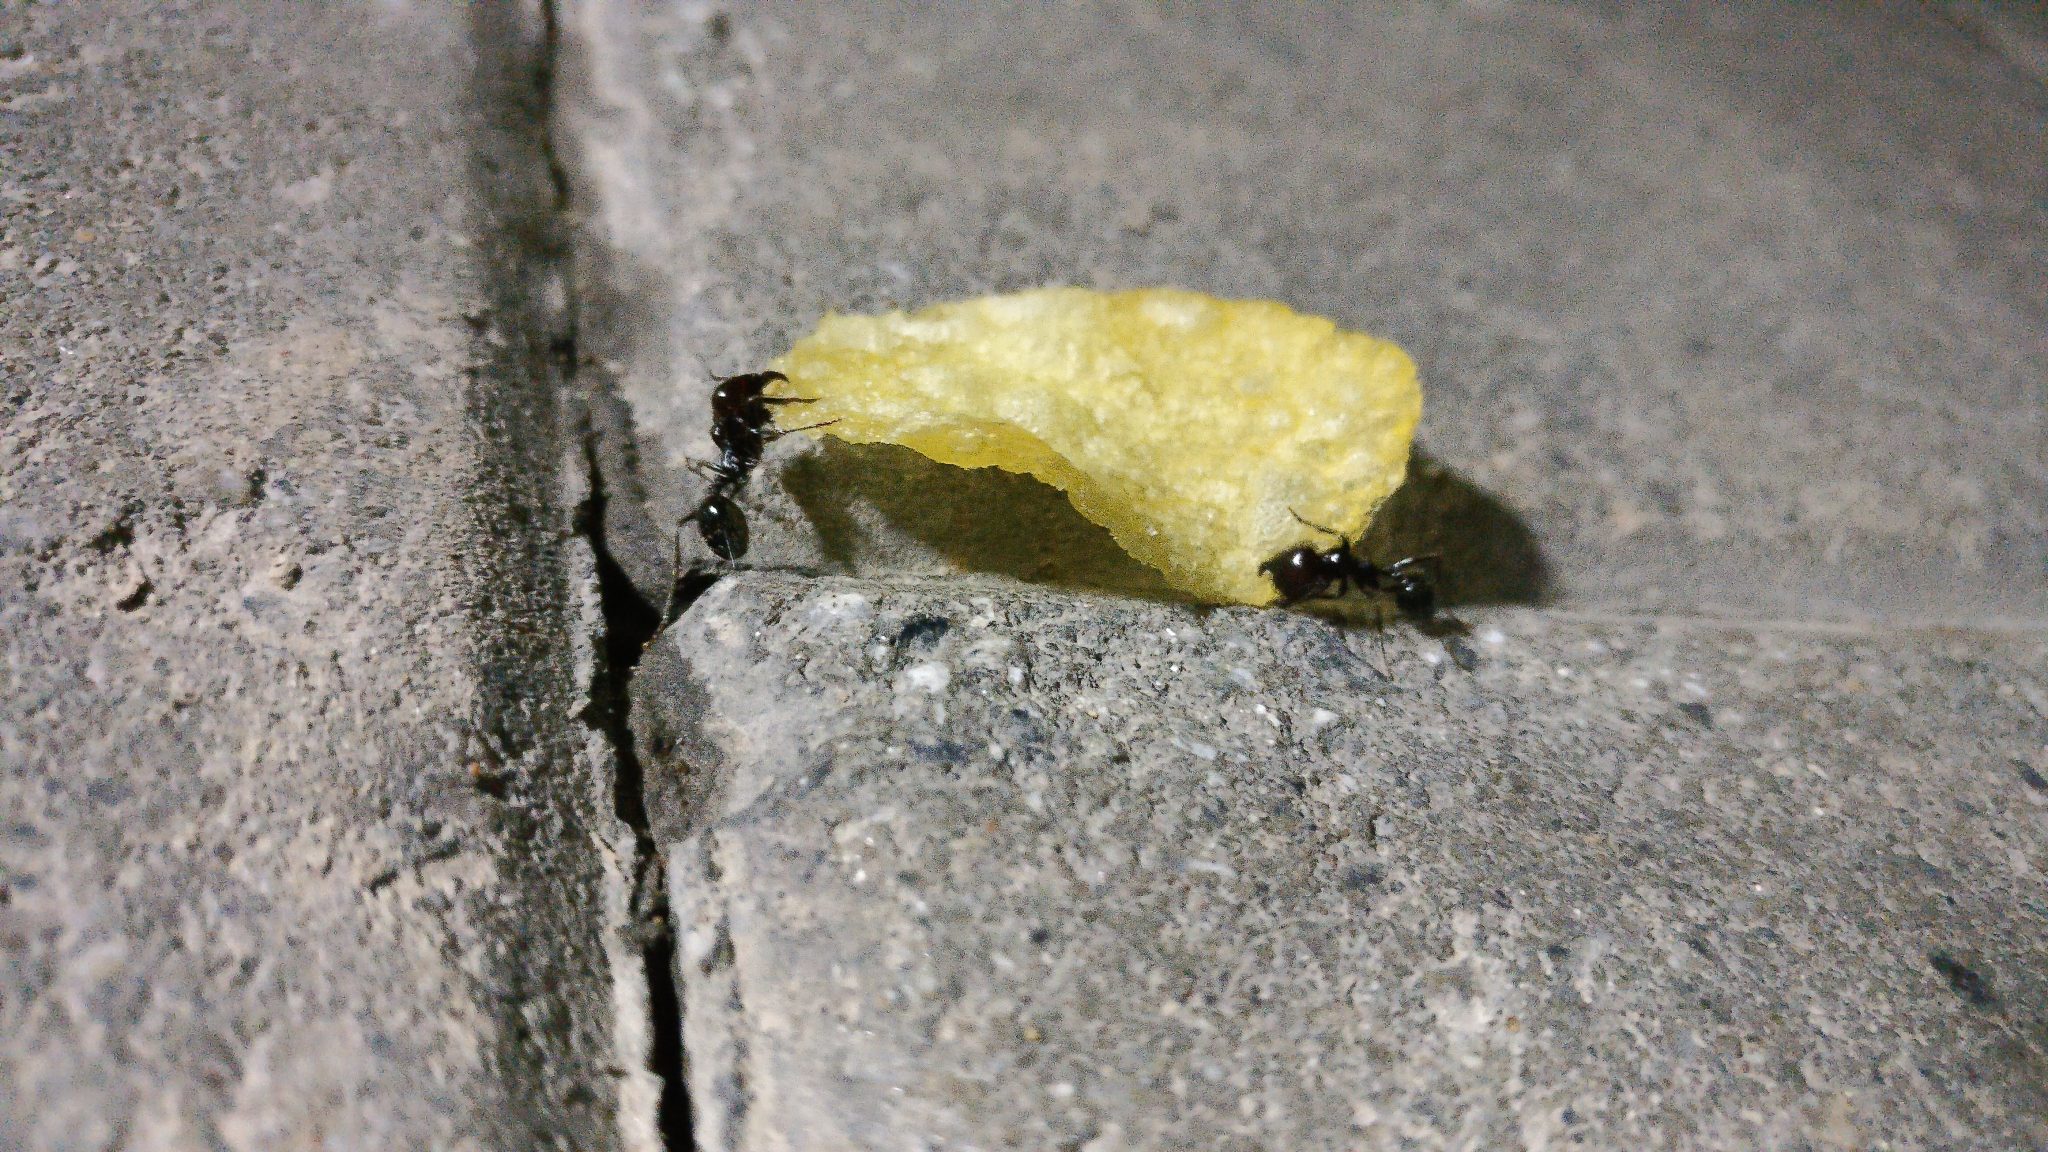 Ants carrying a chip or crisp